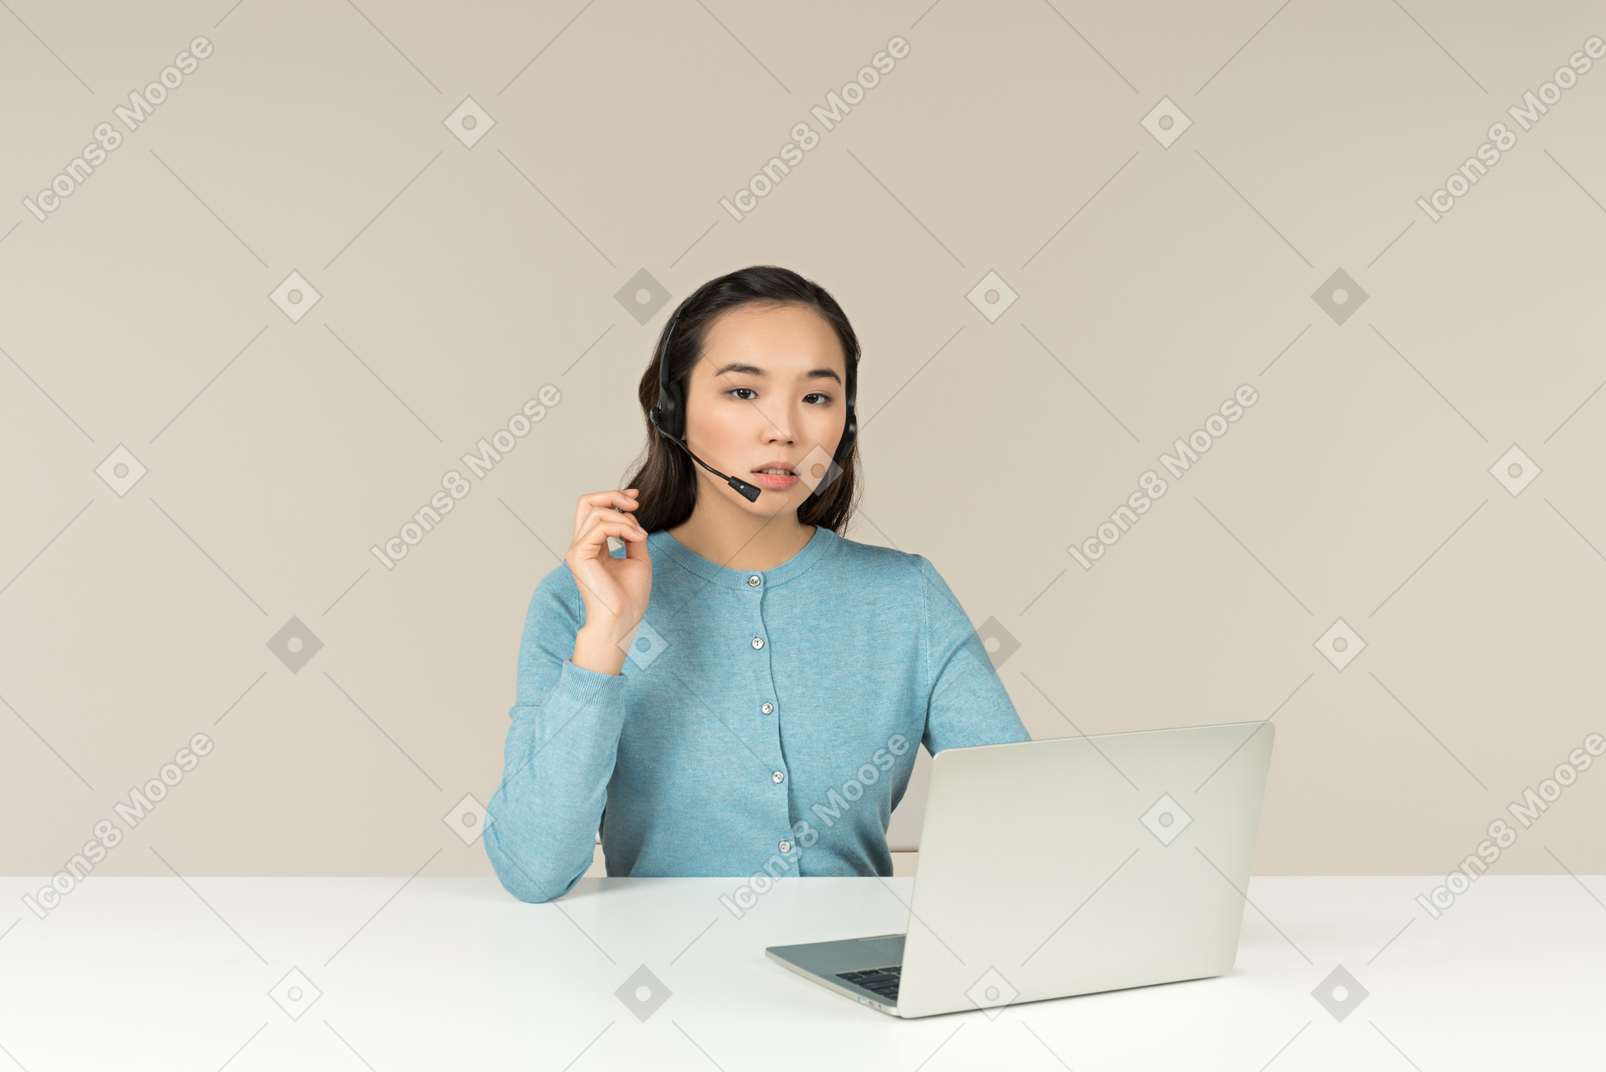 Customer support manager at work